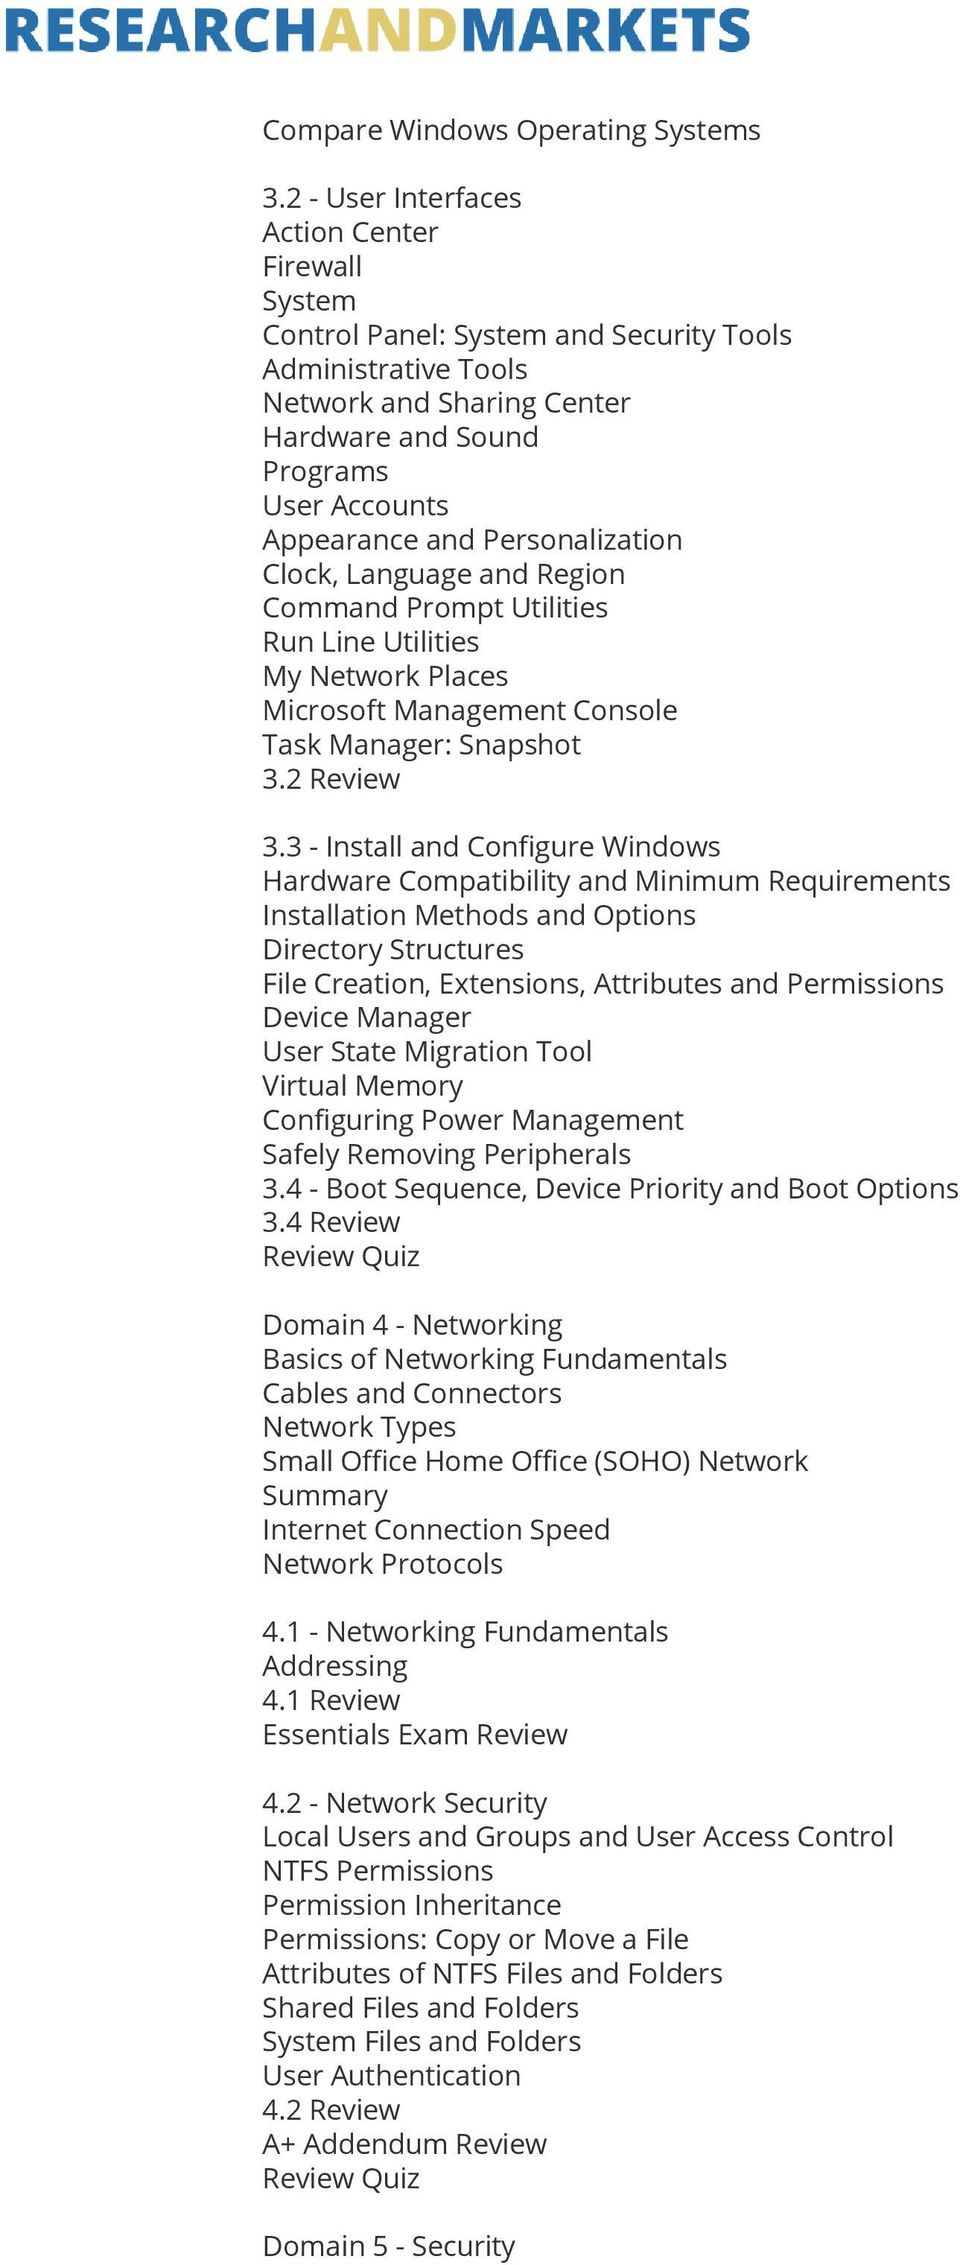 Personalization Clock, Language and Region Command Prompt Utilities Run Line Utilities My Network Places Microsoft Management Console Task Manager: Snapshot 3.2 Review 3.